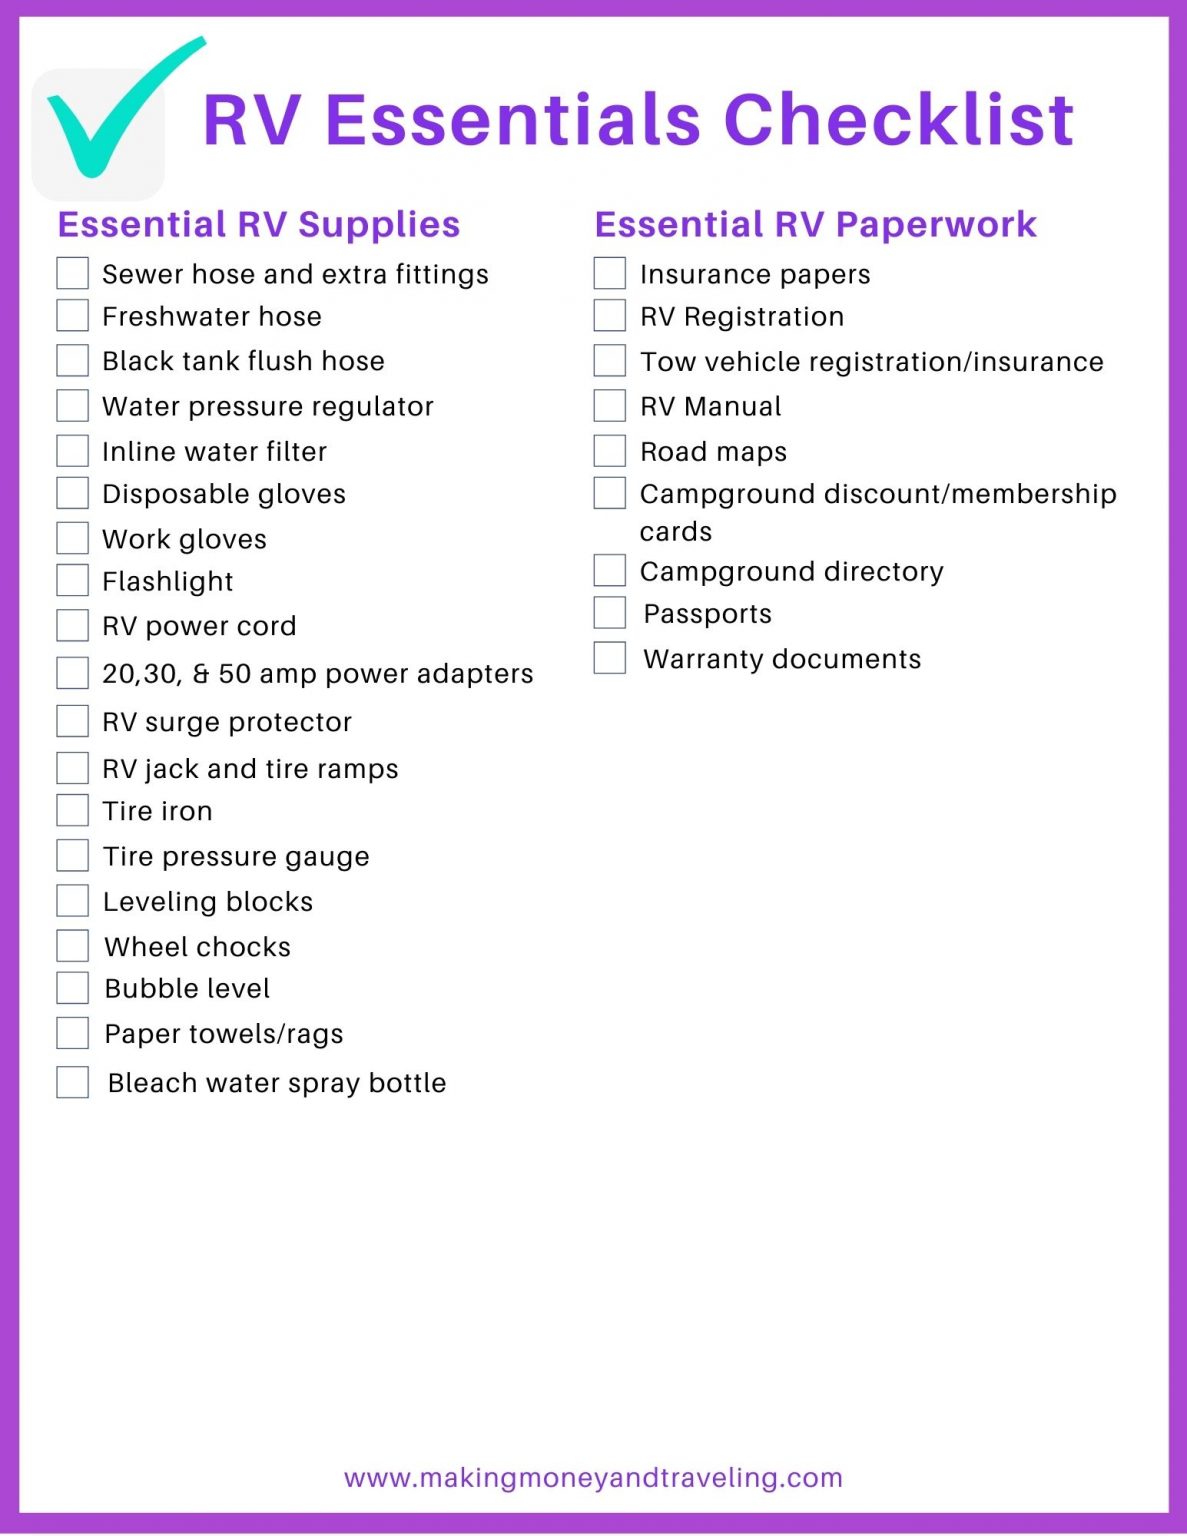 The Only RV Checklist Post You'll Ever Need in 2023 & Beyond